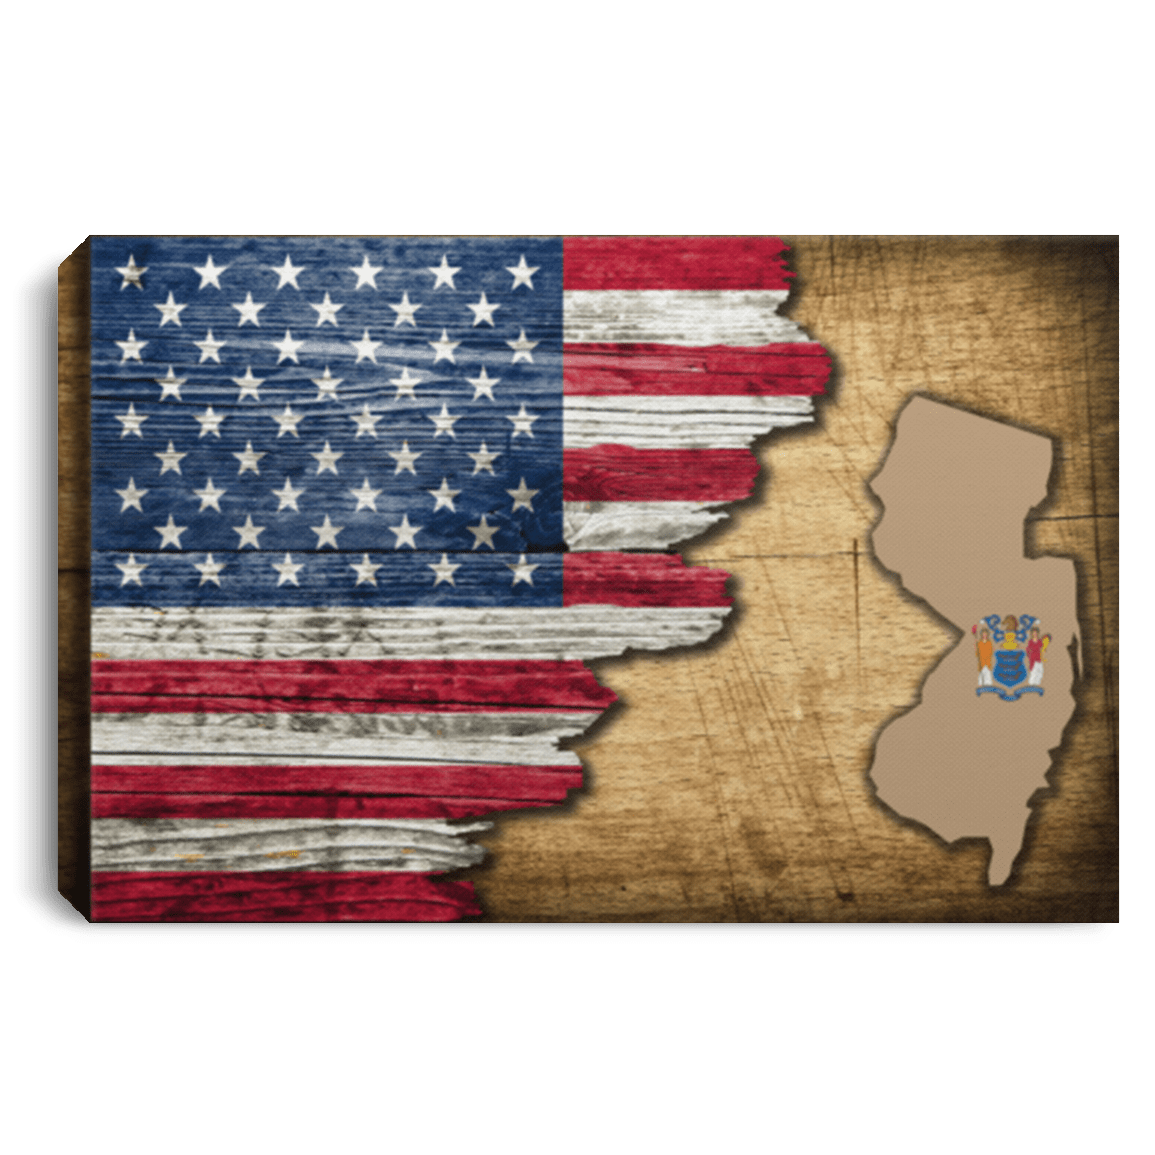 United States/New Jersey Flag Ripped Effect 12X8 Inches Landscape Canvas .75In Frame